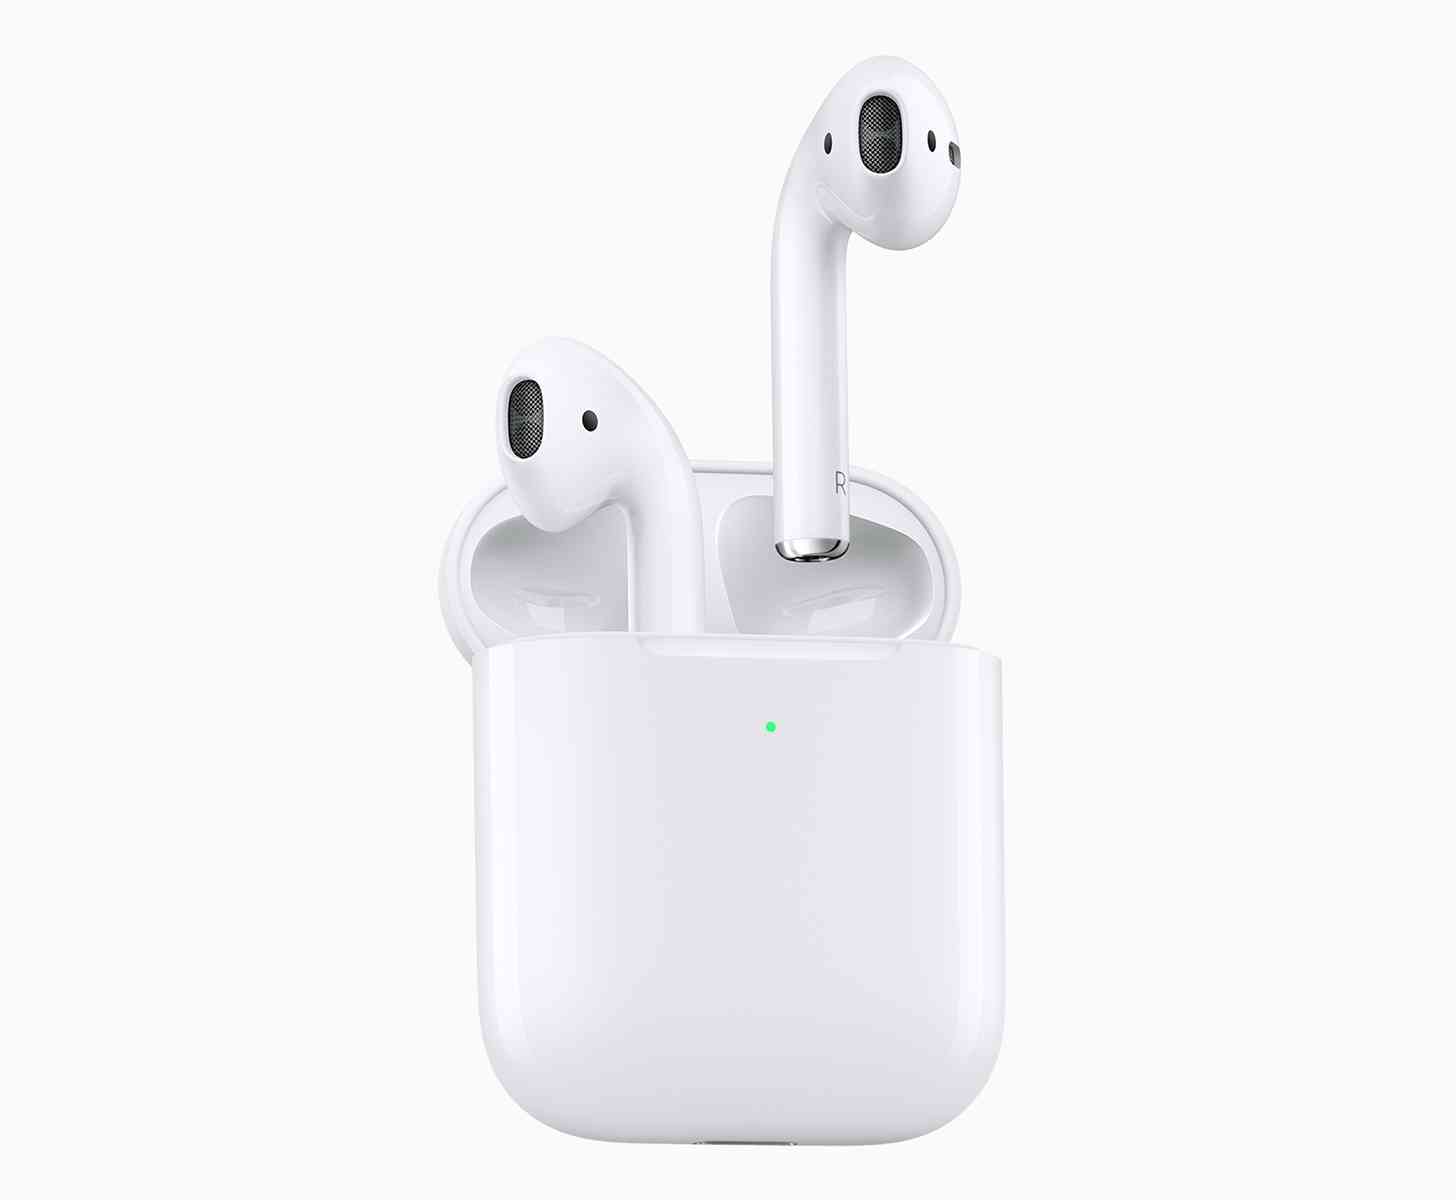 New Apple AirPods wireless charging case